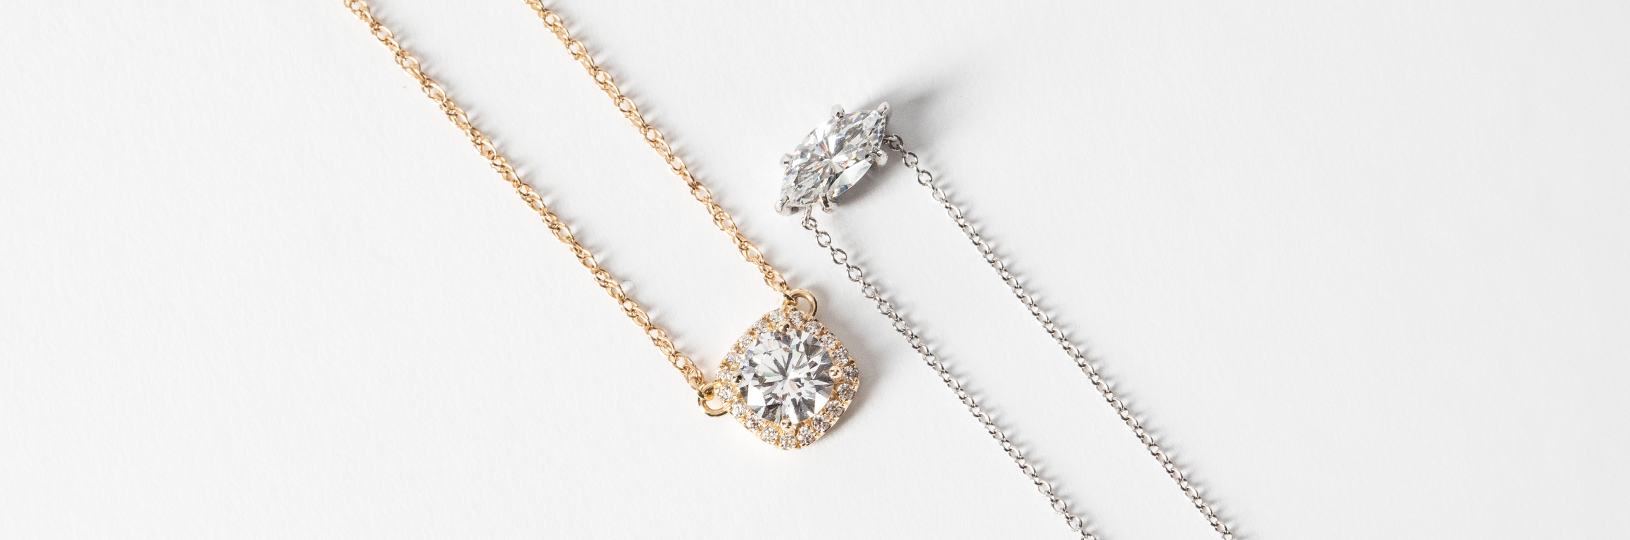 Two necklaces, one in yellow gold, the other in white gold